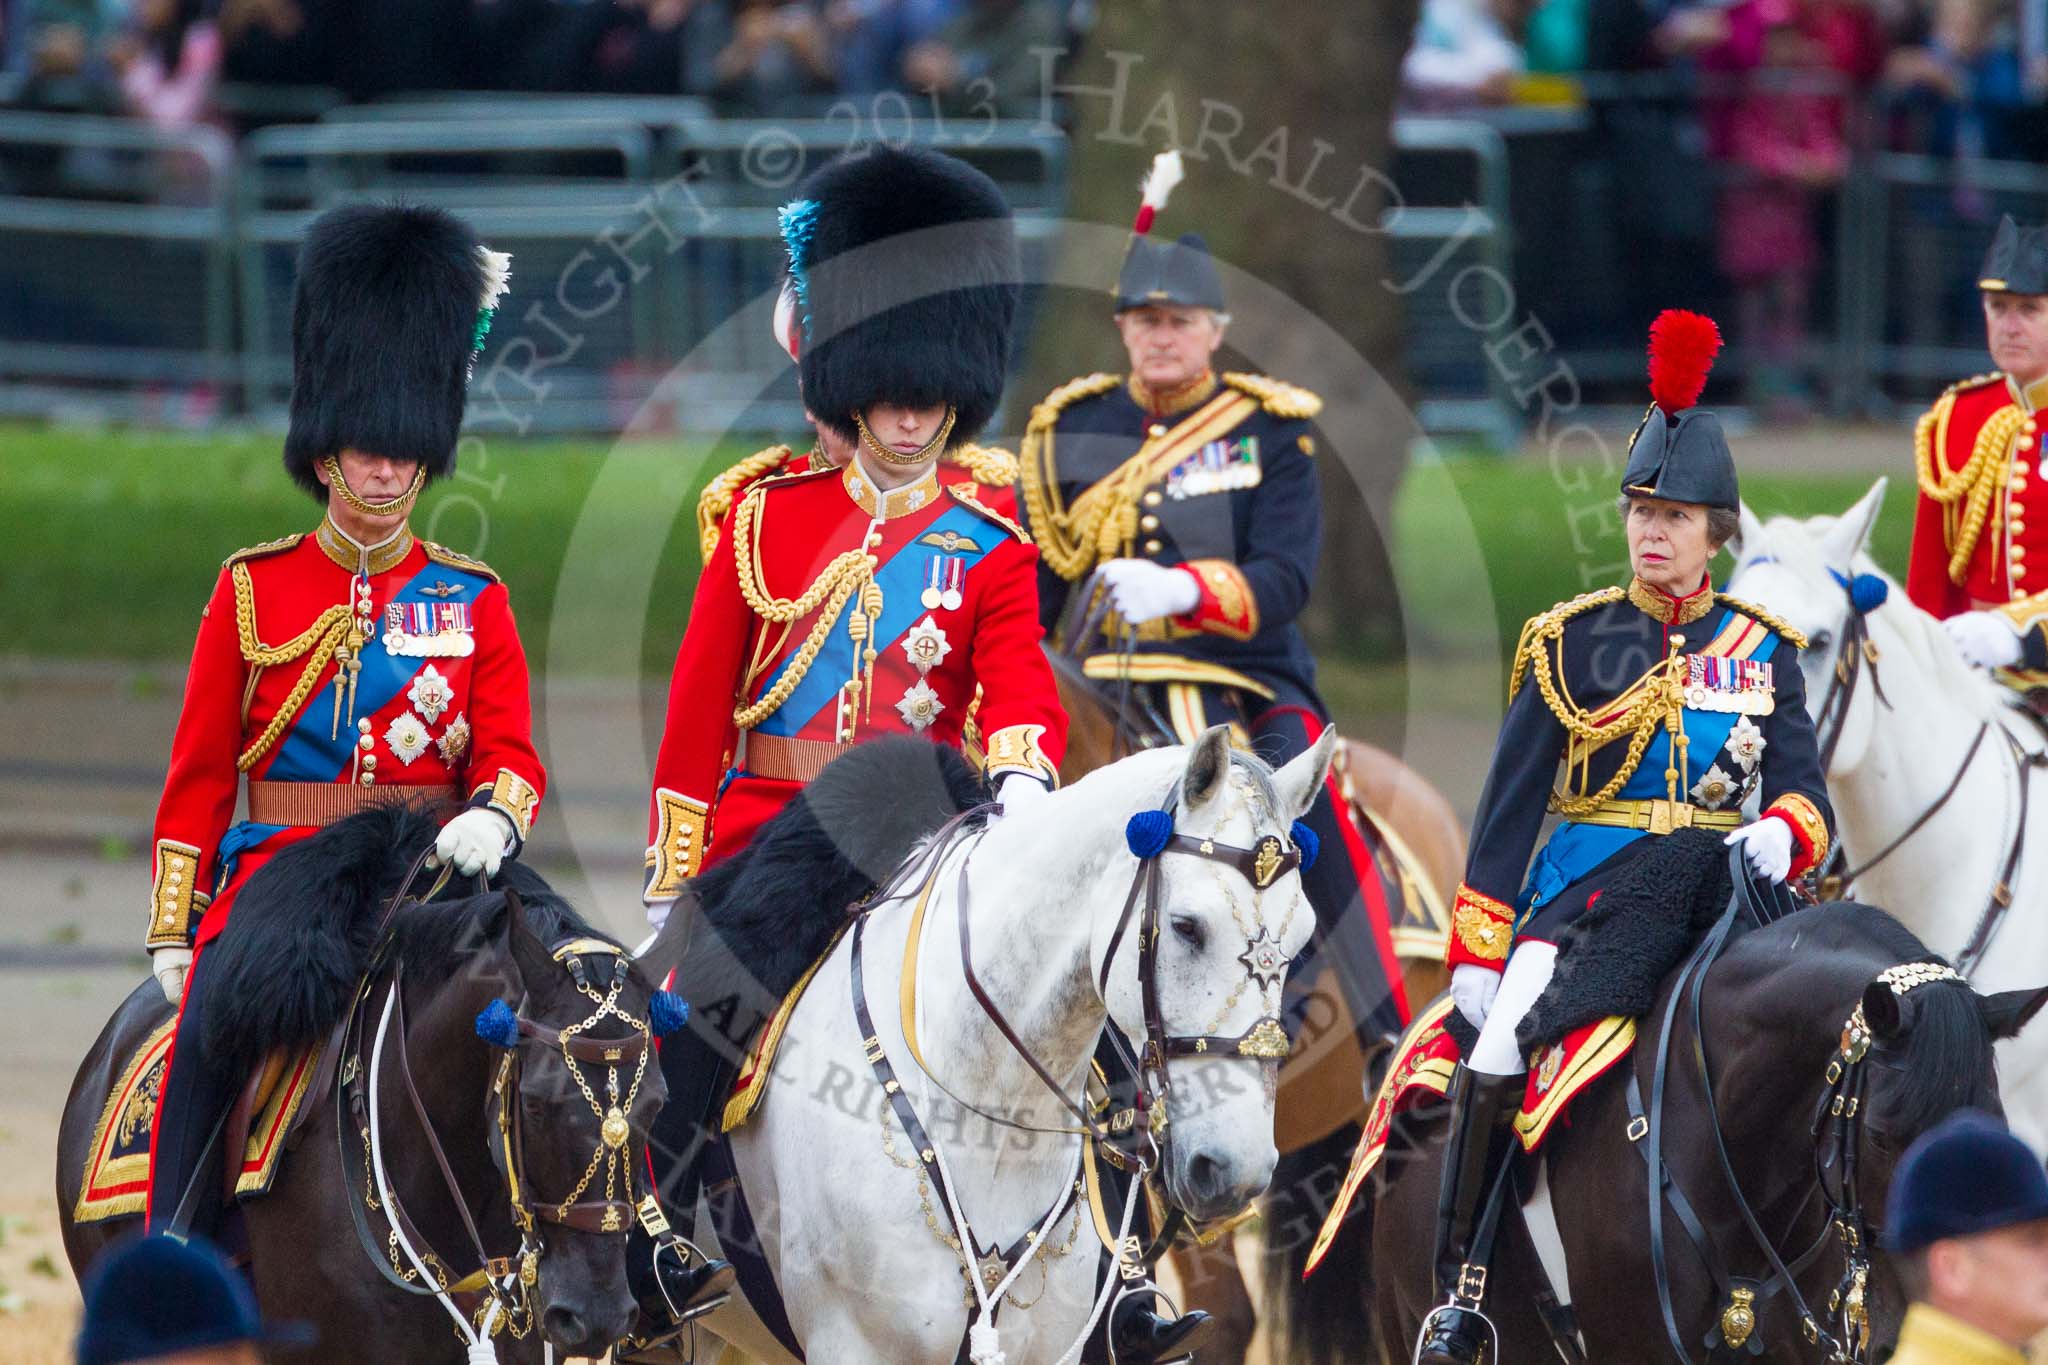 Trooping the Colour 2015.
Horse Guards Parade, Westminster,
London,

United Kingdom,
on 13 June 2015 at 11:05, image #295